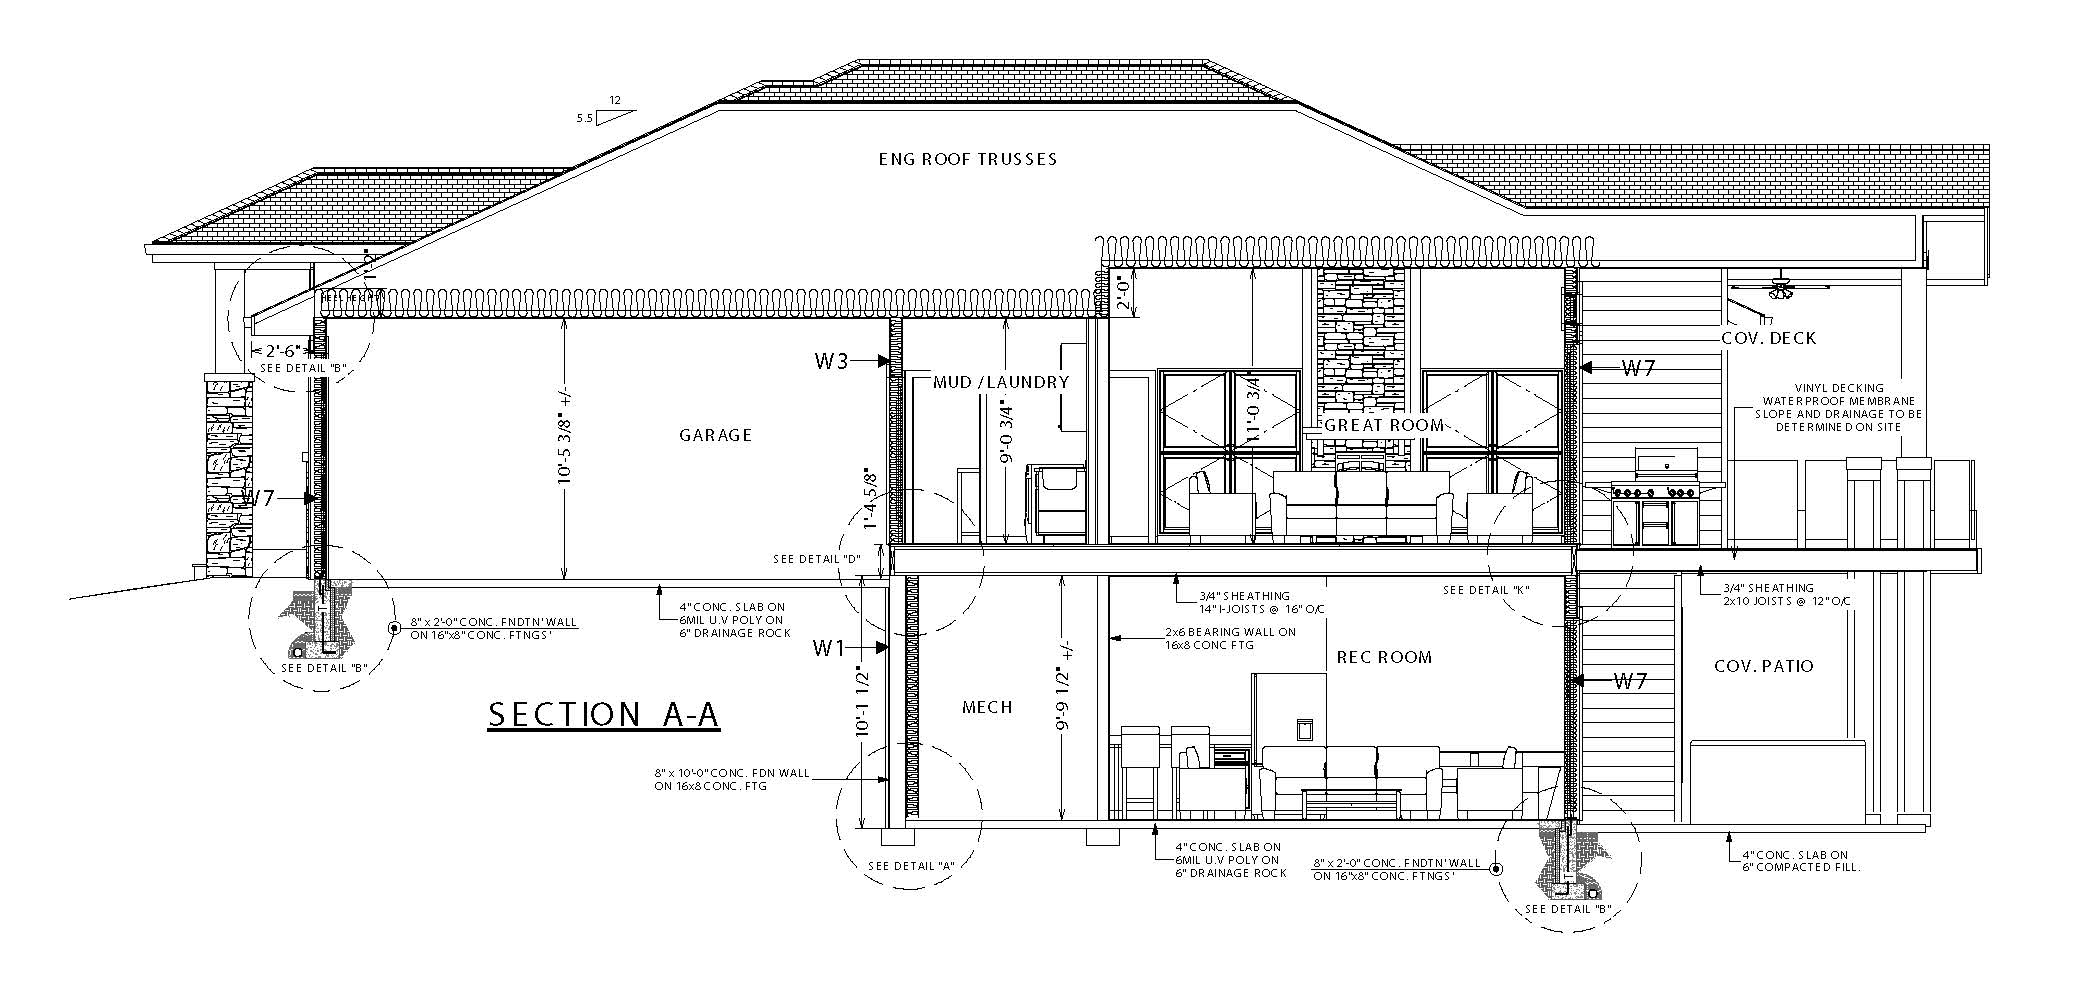 The Columbia Page 5 - Custom Home Plans / Elevations